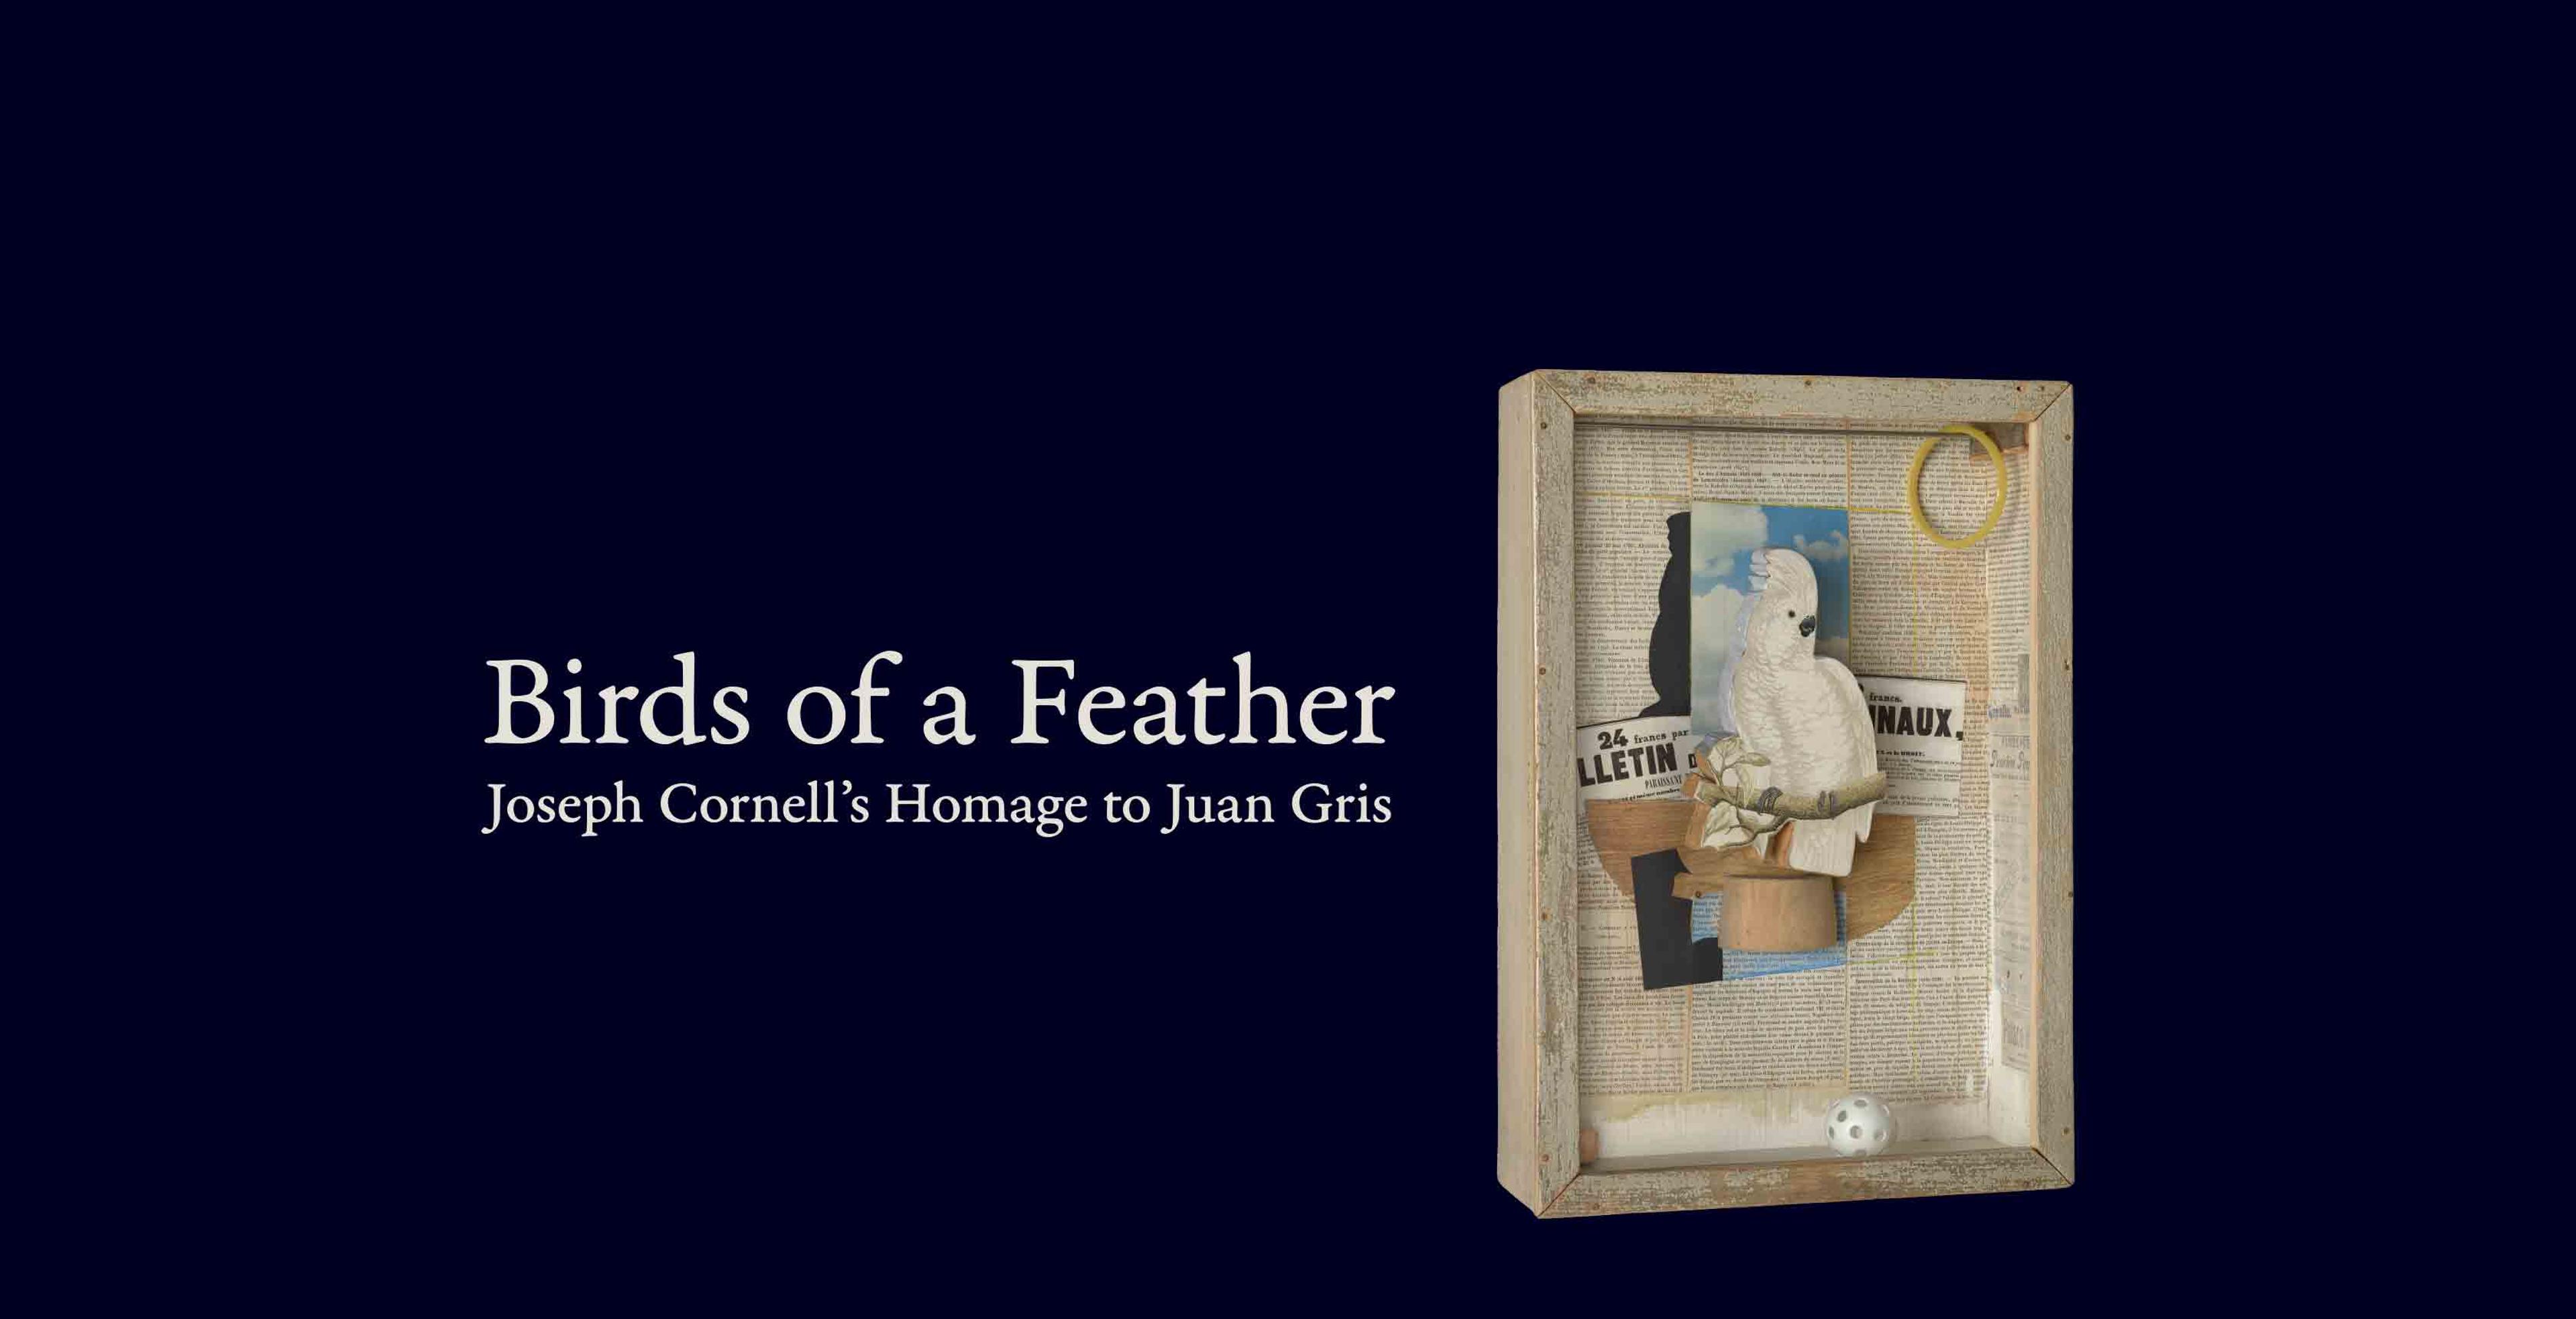 An image with a dark blue background and the exhibition title to the left in white letters. On the right, there is box construction by Juan Gris. 